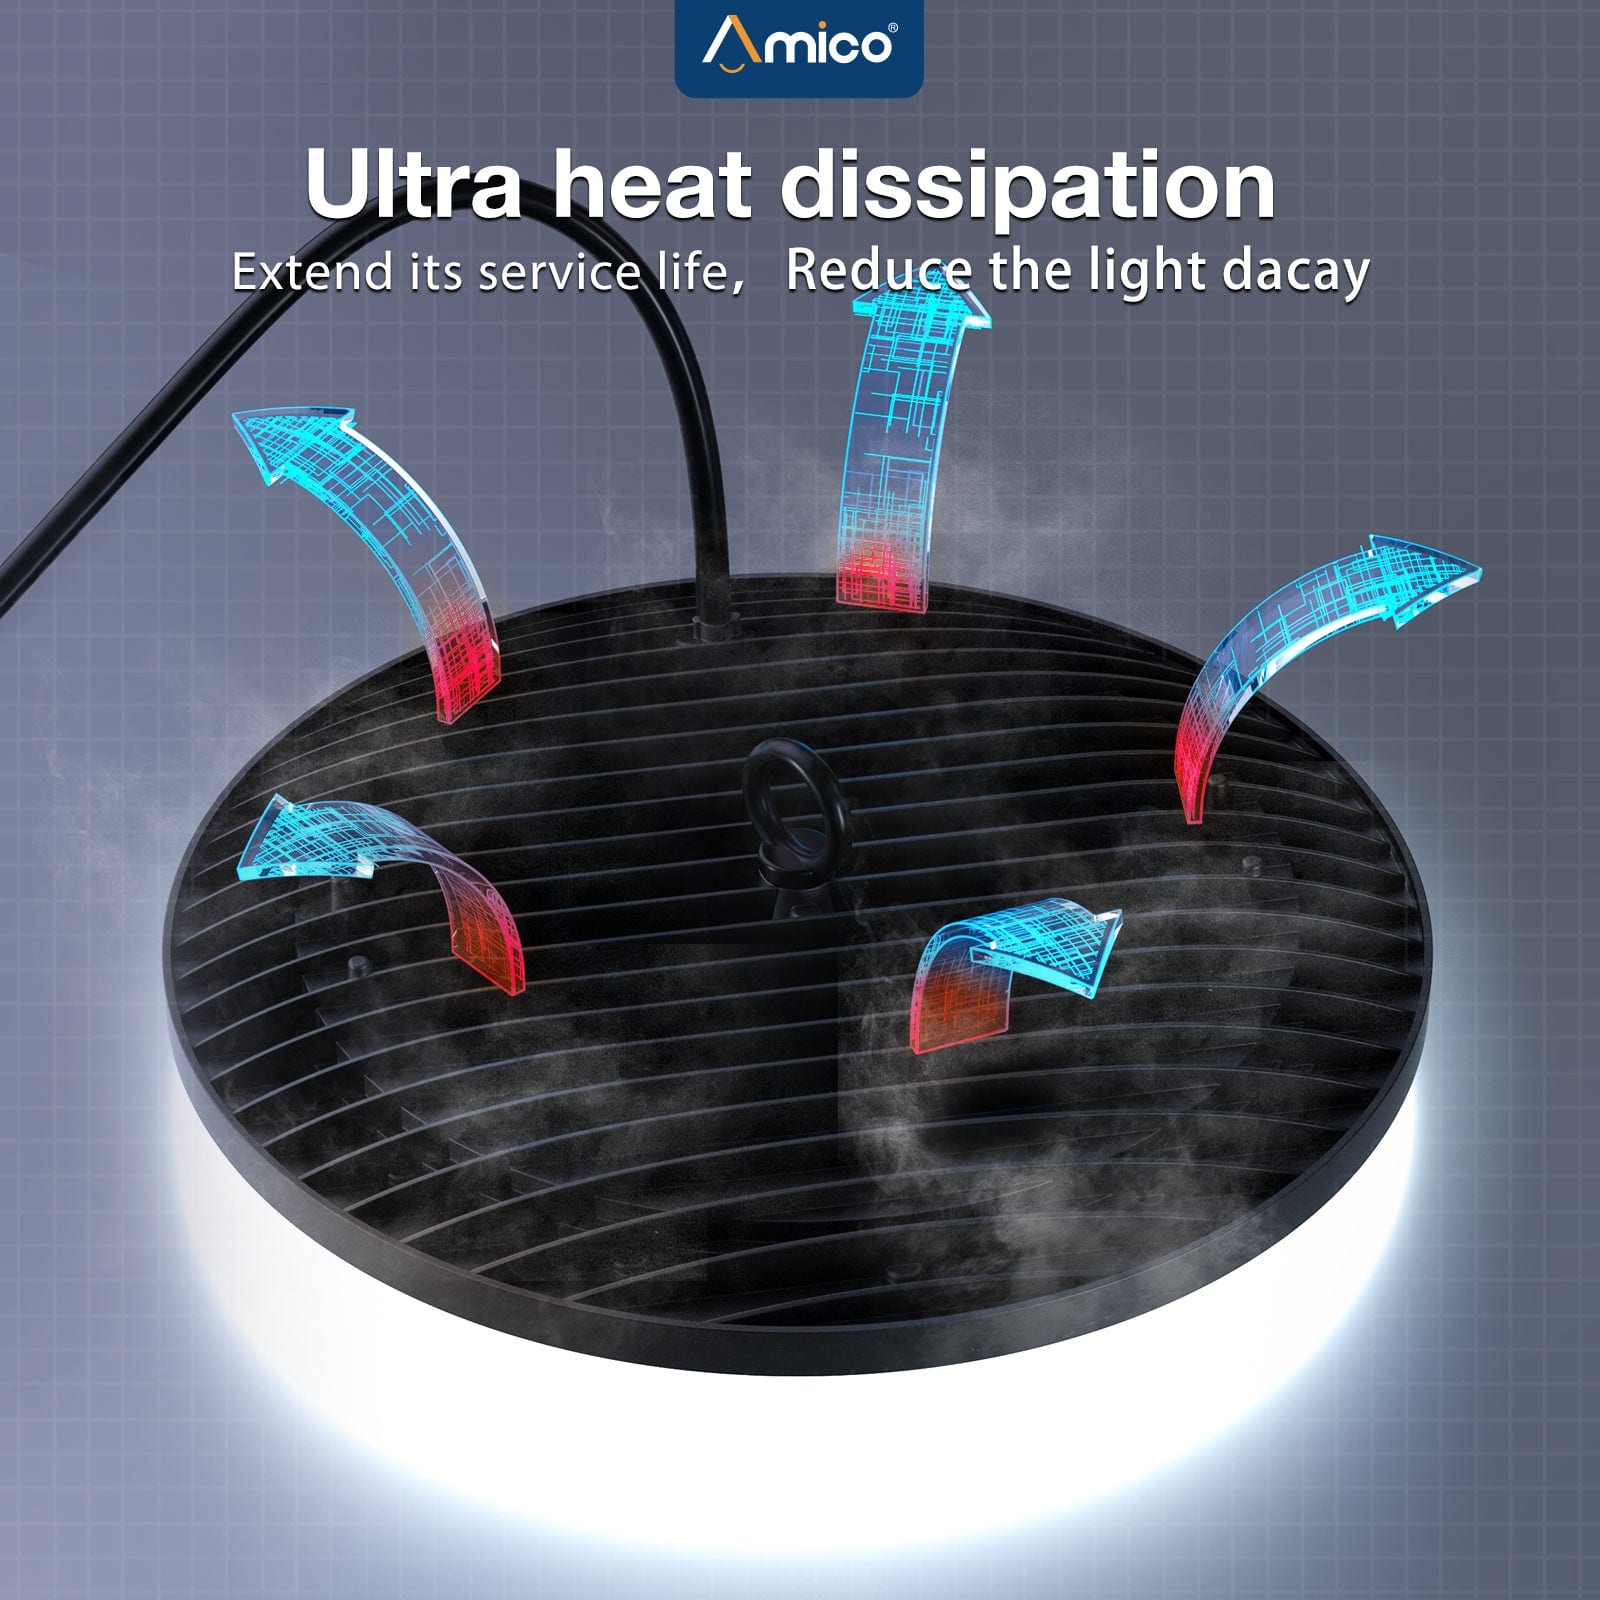 Ultra heat dissipation can extend its service life and reduce the light dacay.